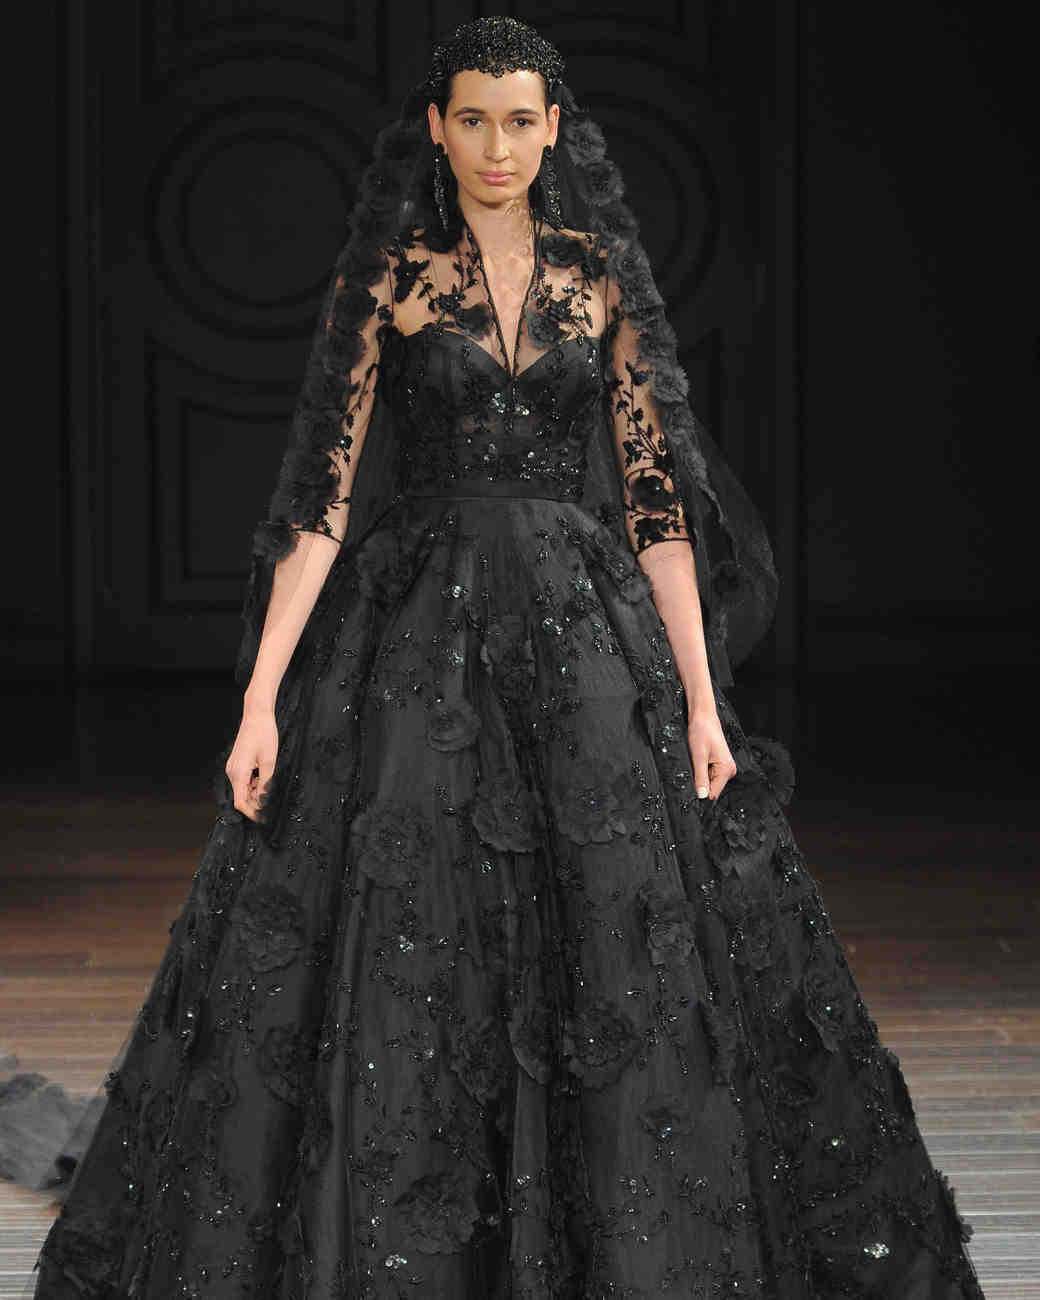 Black Dresses For Wedding
 Chic Black Wedding Dress for the Edgy Bride